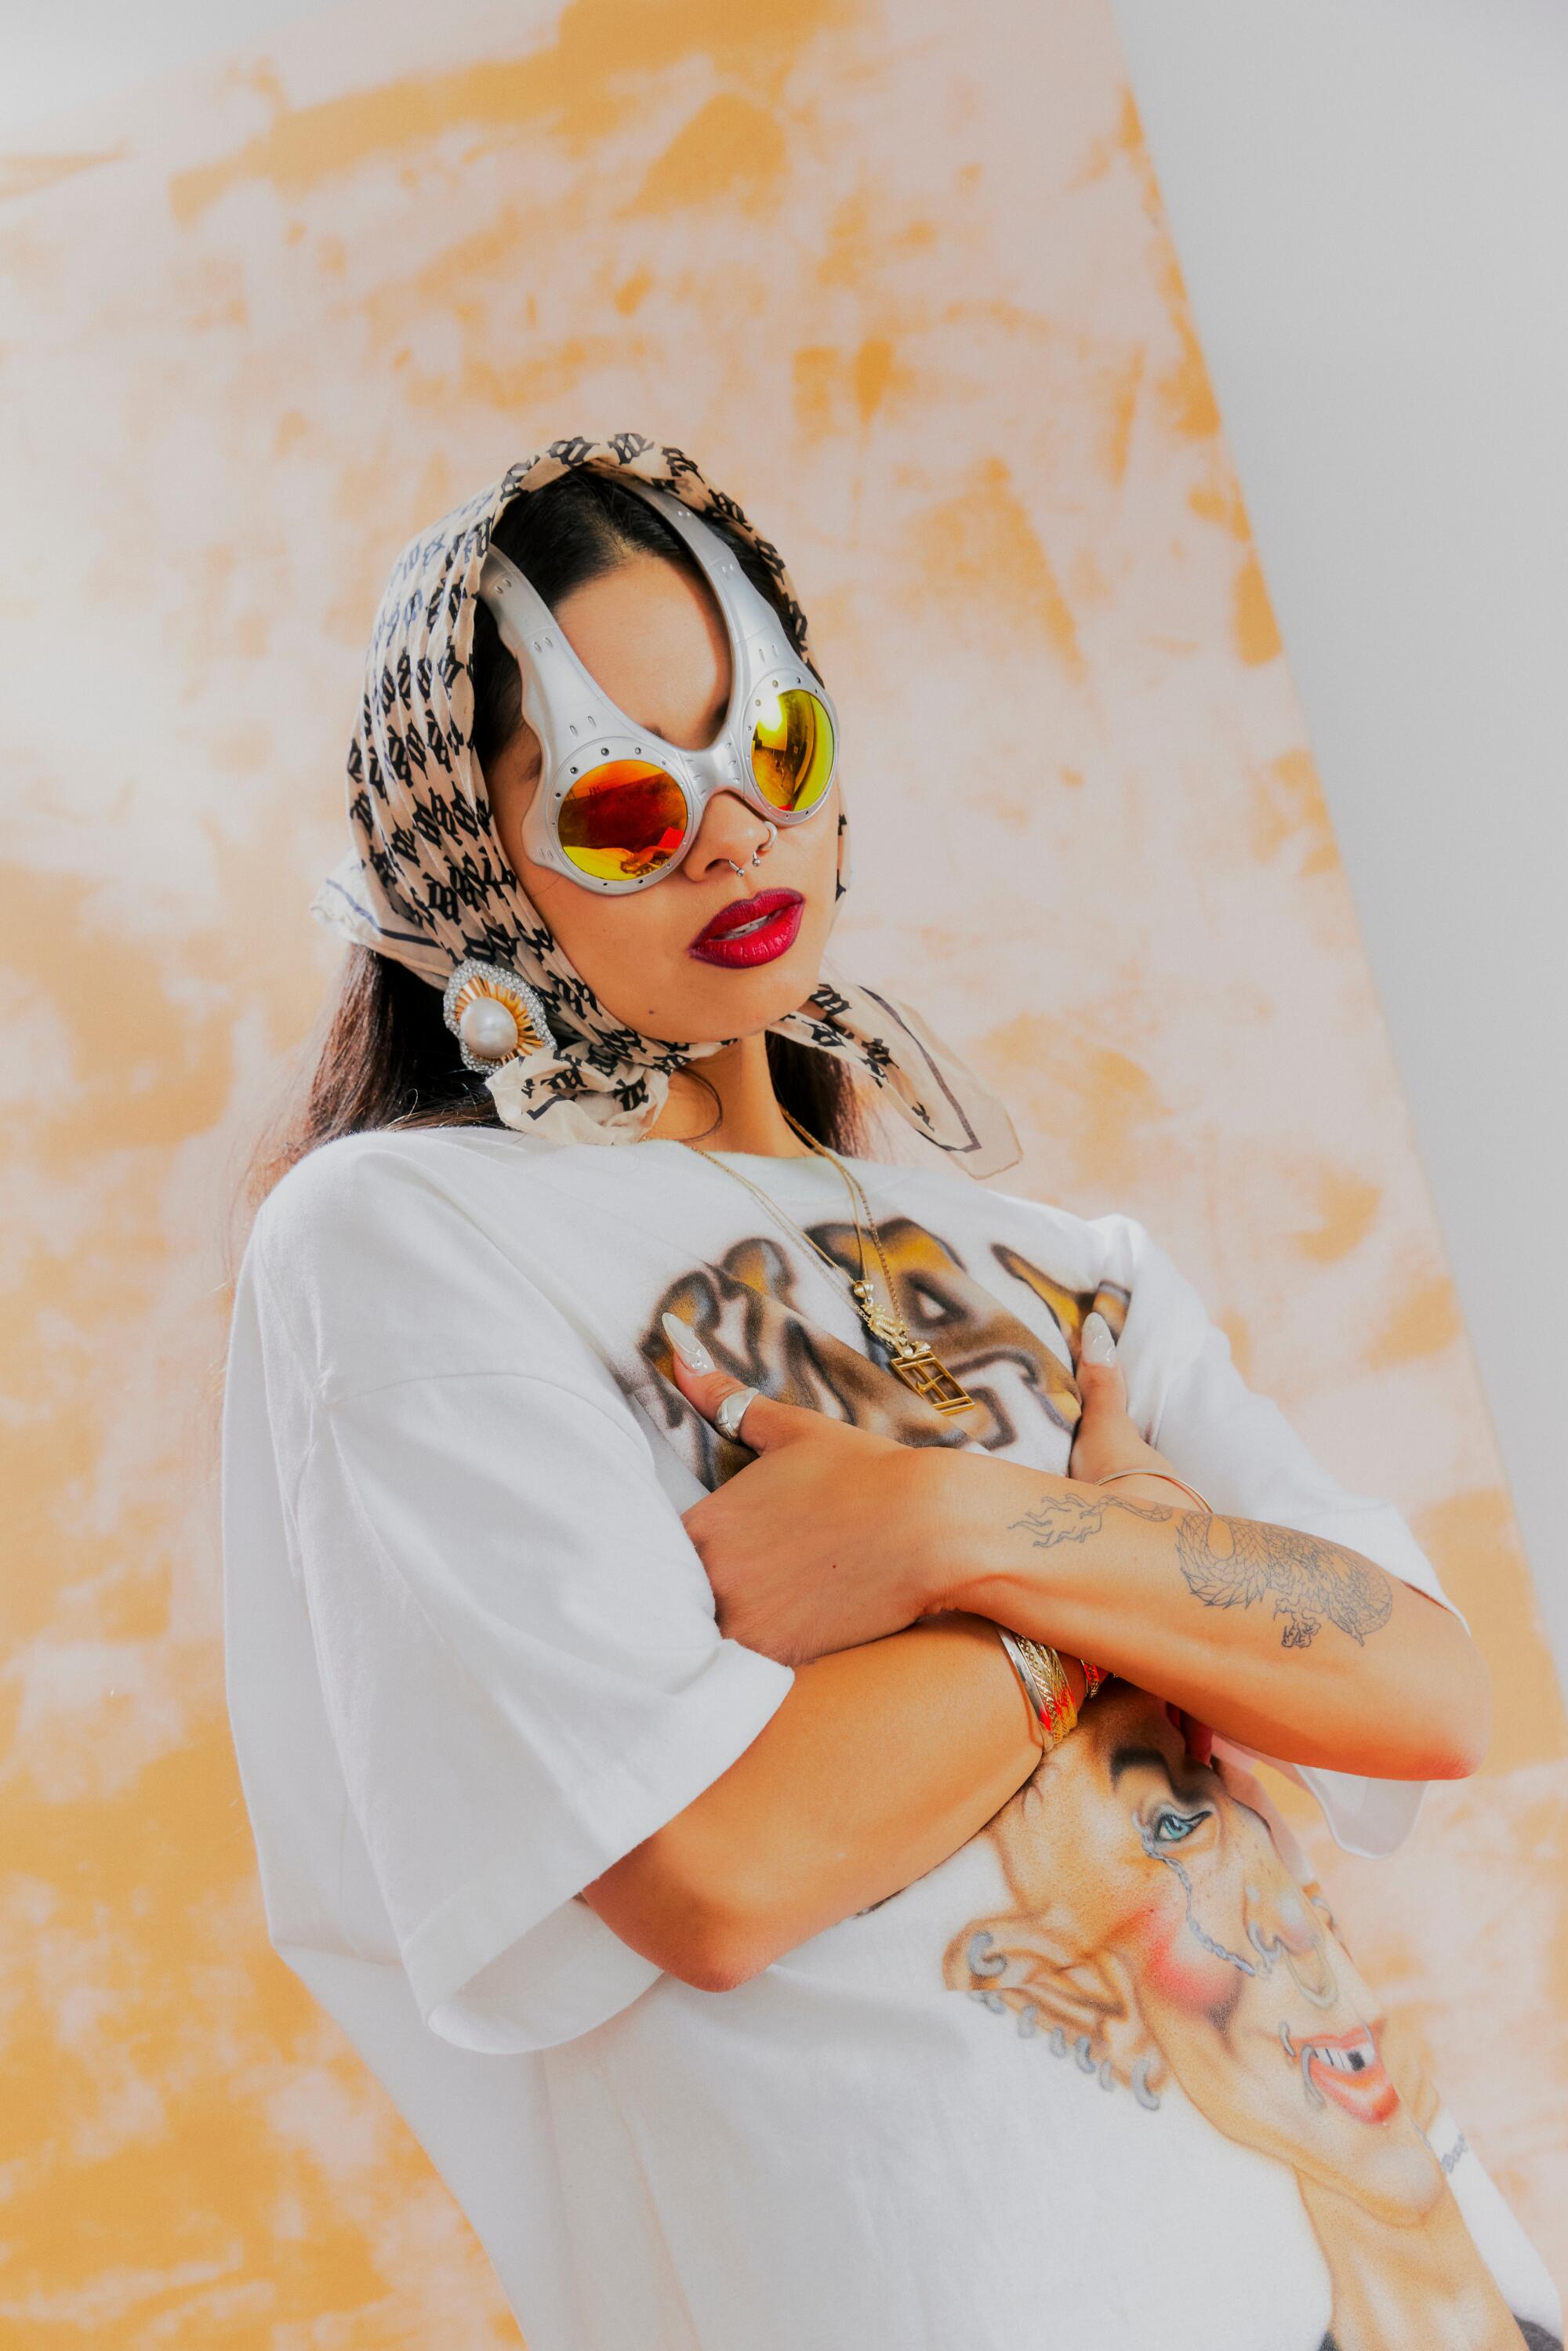 Ann-Marie Hoang posing in a headscarf, Over the Top sunglasses and a graphic T-shirt.